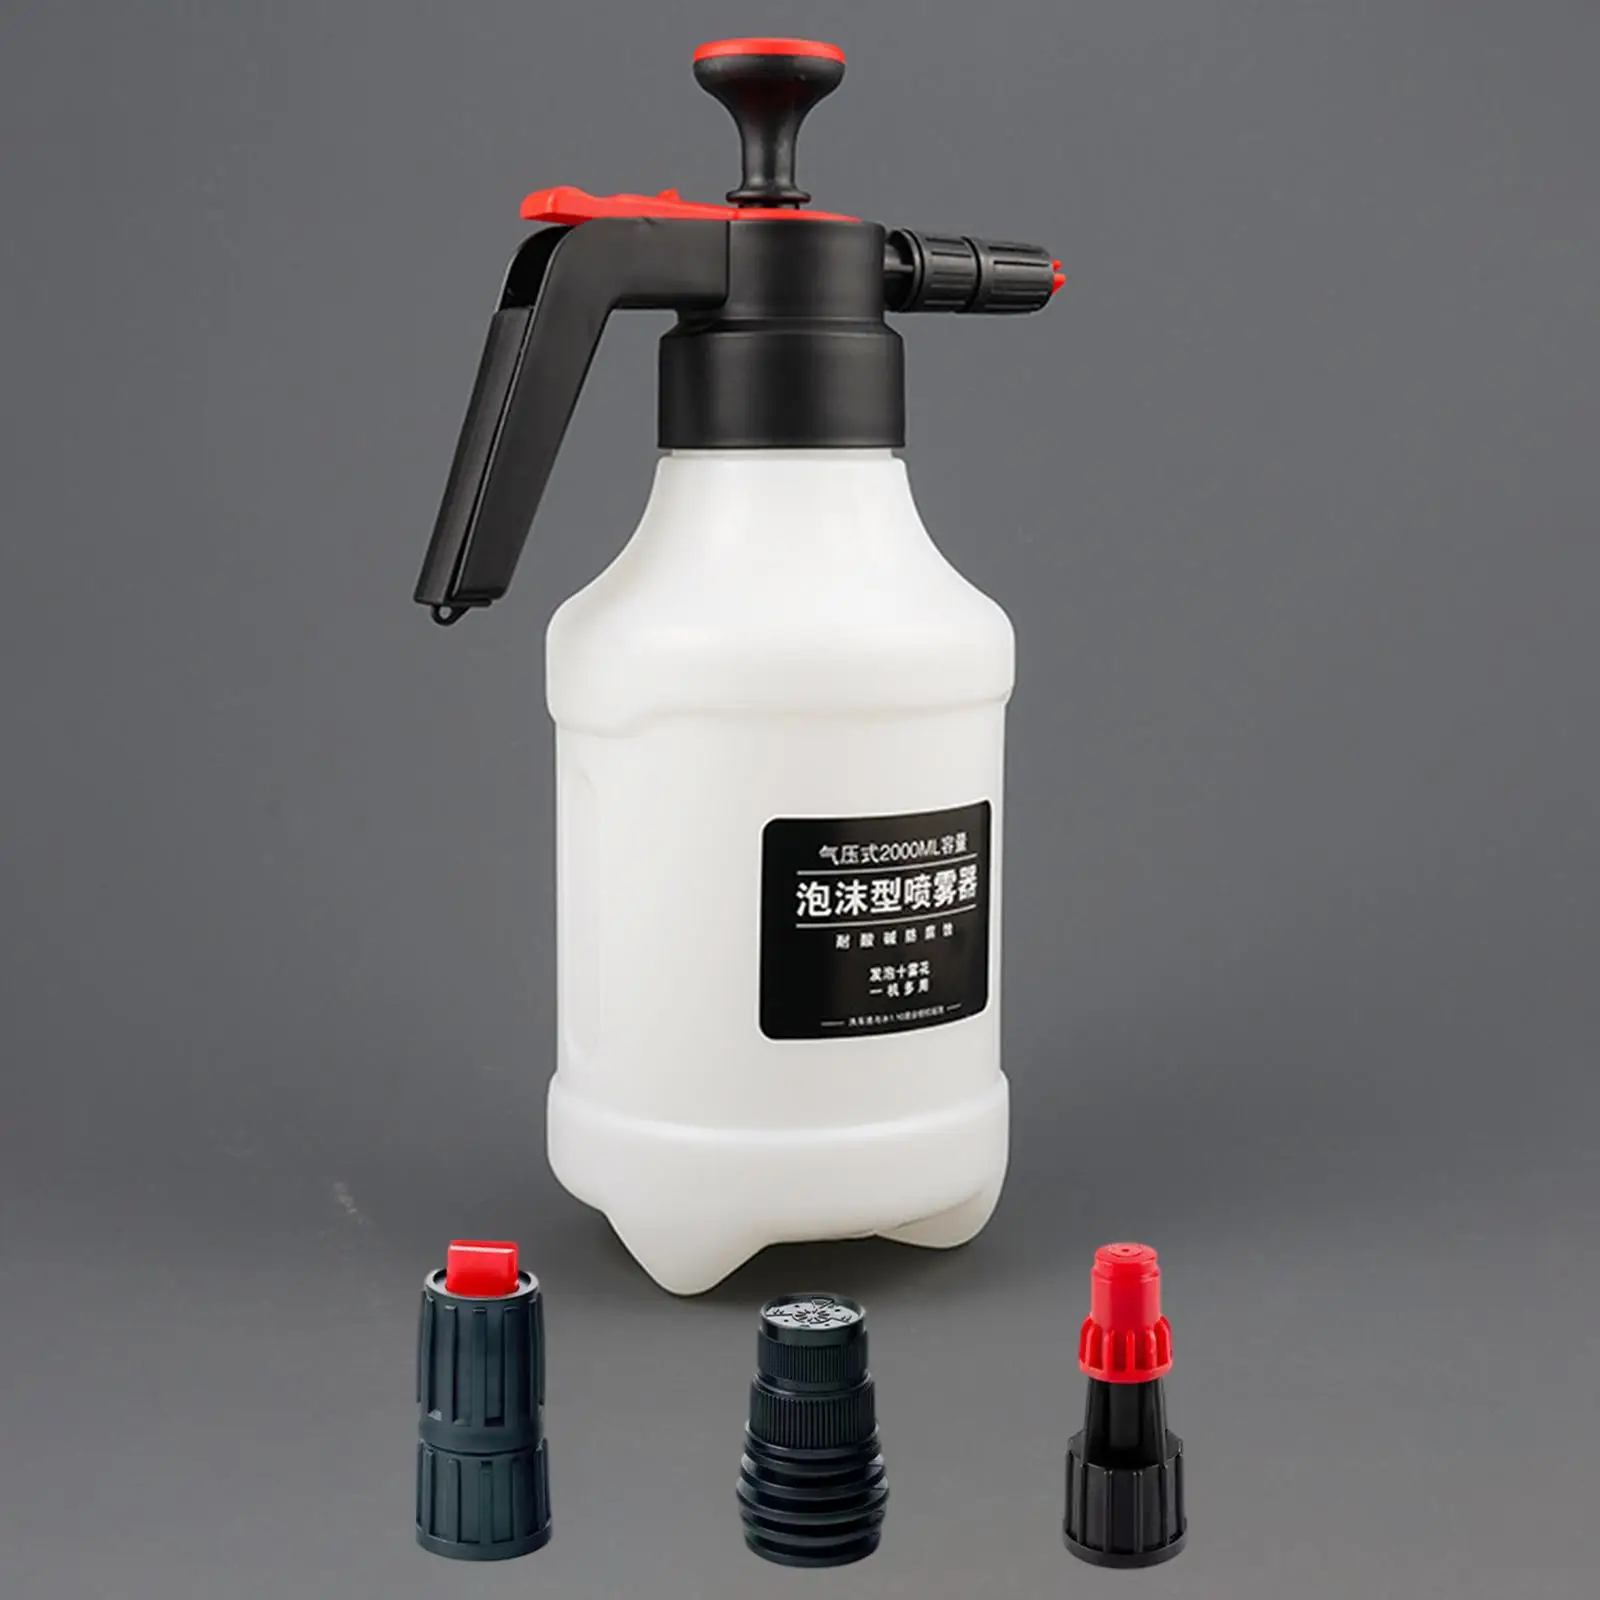 Hand Pump Pressure Sprayer, Foam Sprayer for Home, Lawn, Garden, Car Detailing and Home Window Cleaning, with 3 Spray Nozzles